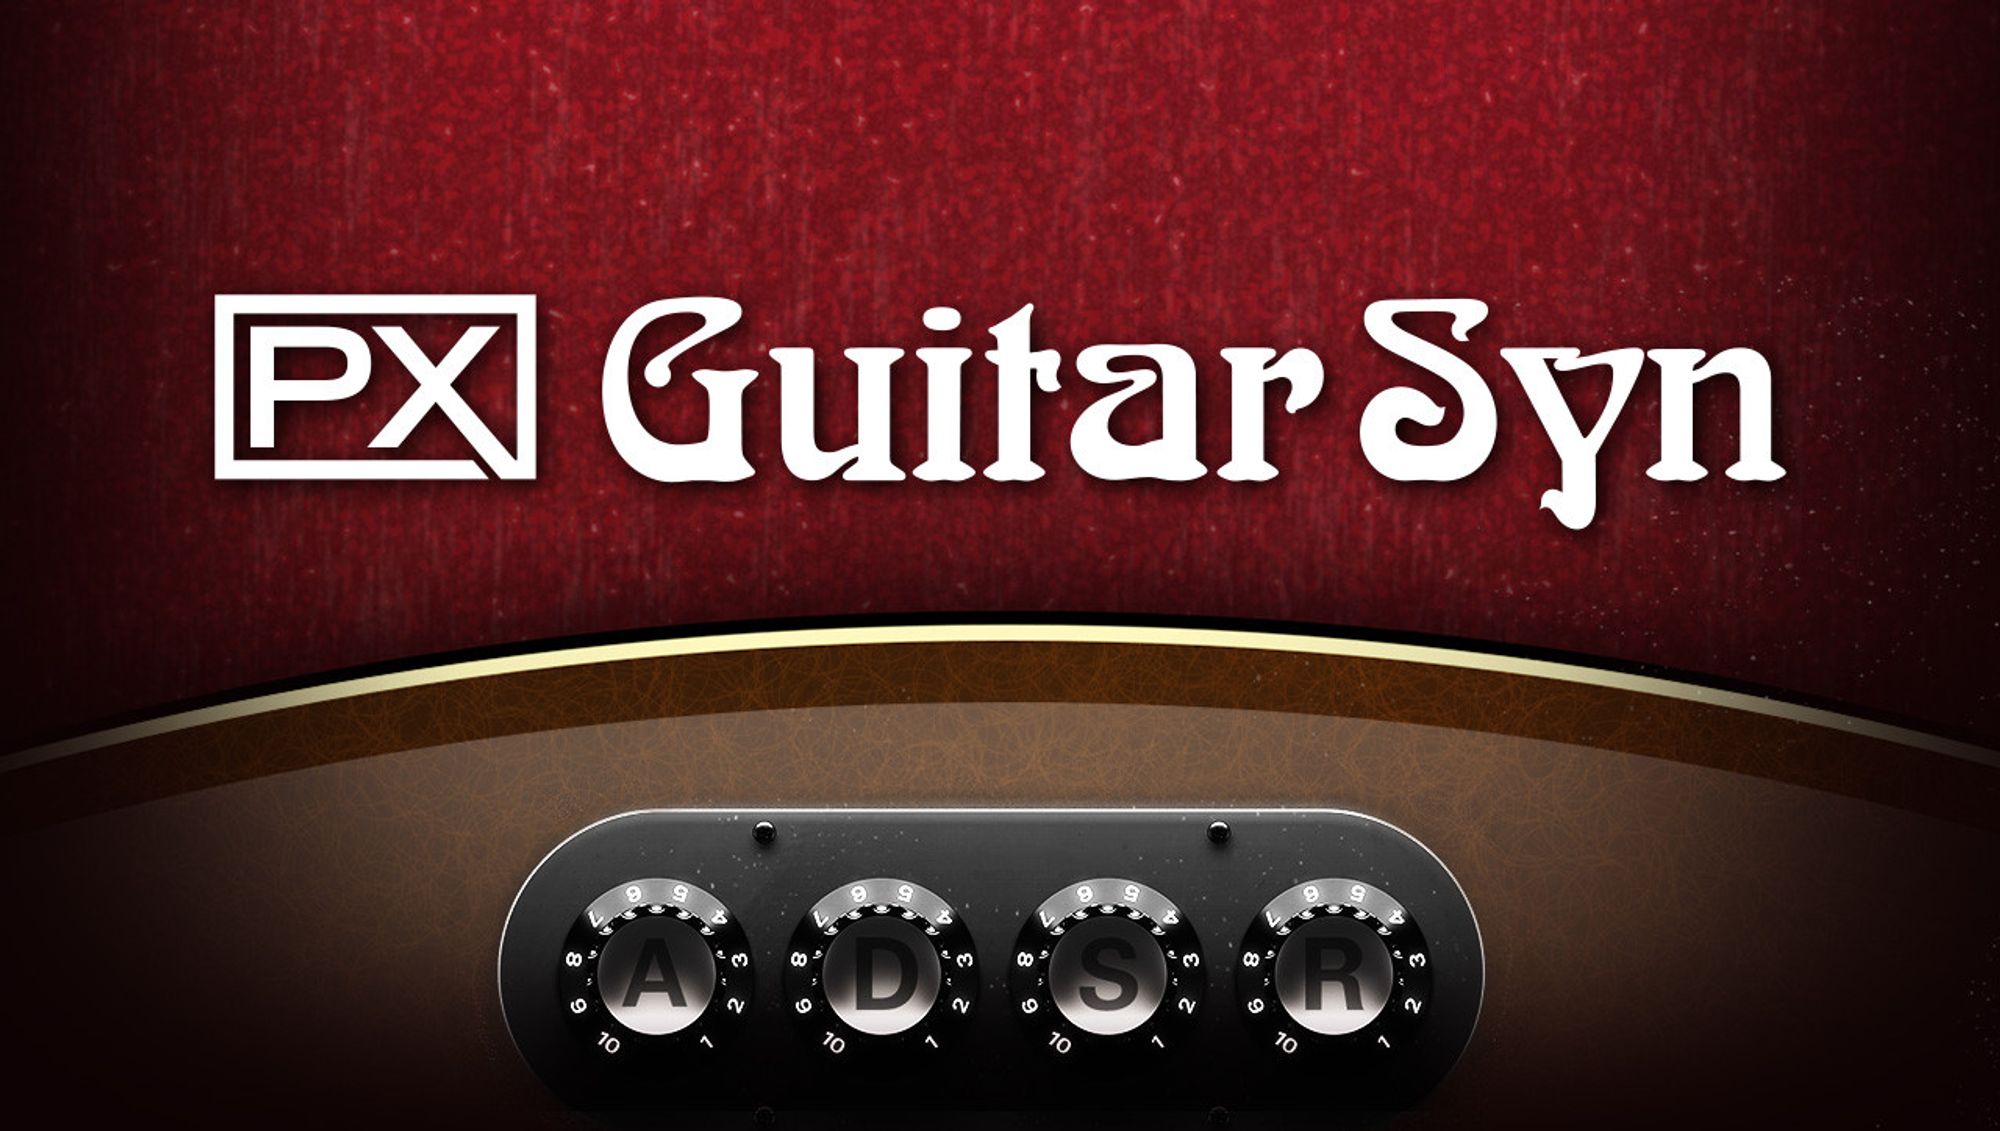 PX Guitar Syn - A modern take on the original guitar synth